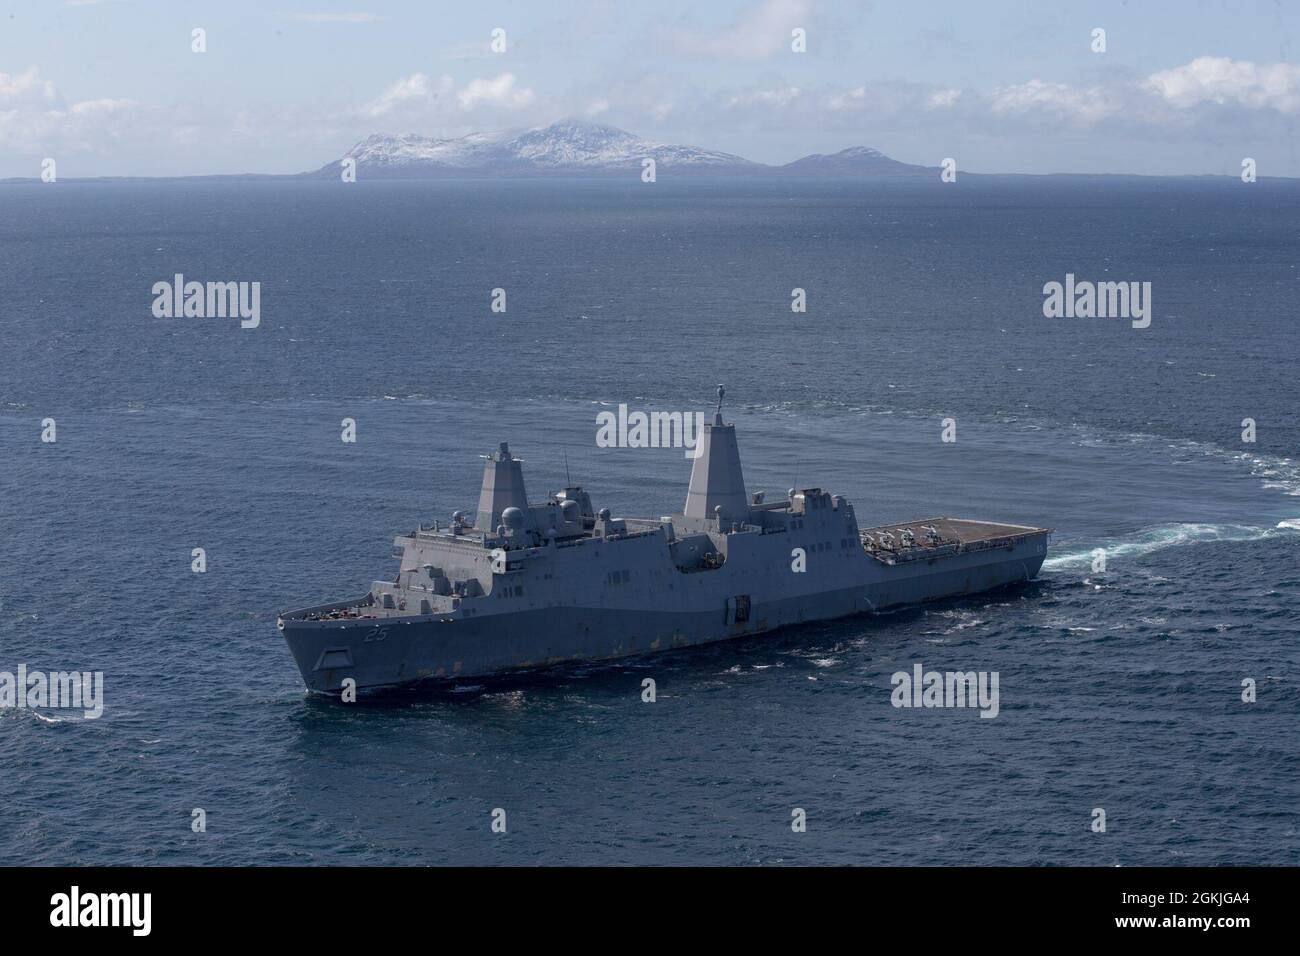 210503-M-JX780-1563 GULF OF ALASKA (May 3, 2021) – The amphibious transport dock ship USS Somerset (LPD 25) maneuvers through the Gulf of Alaska in support of Northern Edge 2021. U.S. service members are participating in a joint training exercise hosted by U.S. Pacific Air Forces May 3-14, 2021, on and above the Joint Pacific Alaska Range Complex, the Gulf of Alaska, and temporary maritime activities area. NE21 is one in a series of U.S. Indo-Pacific Command exercises designed to sharpen the joint forces’ skills; to practice tactics, techniques, and procedures; to improve command, control and Stock Photo